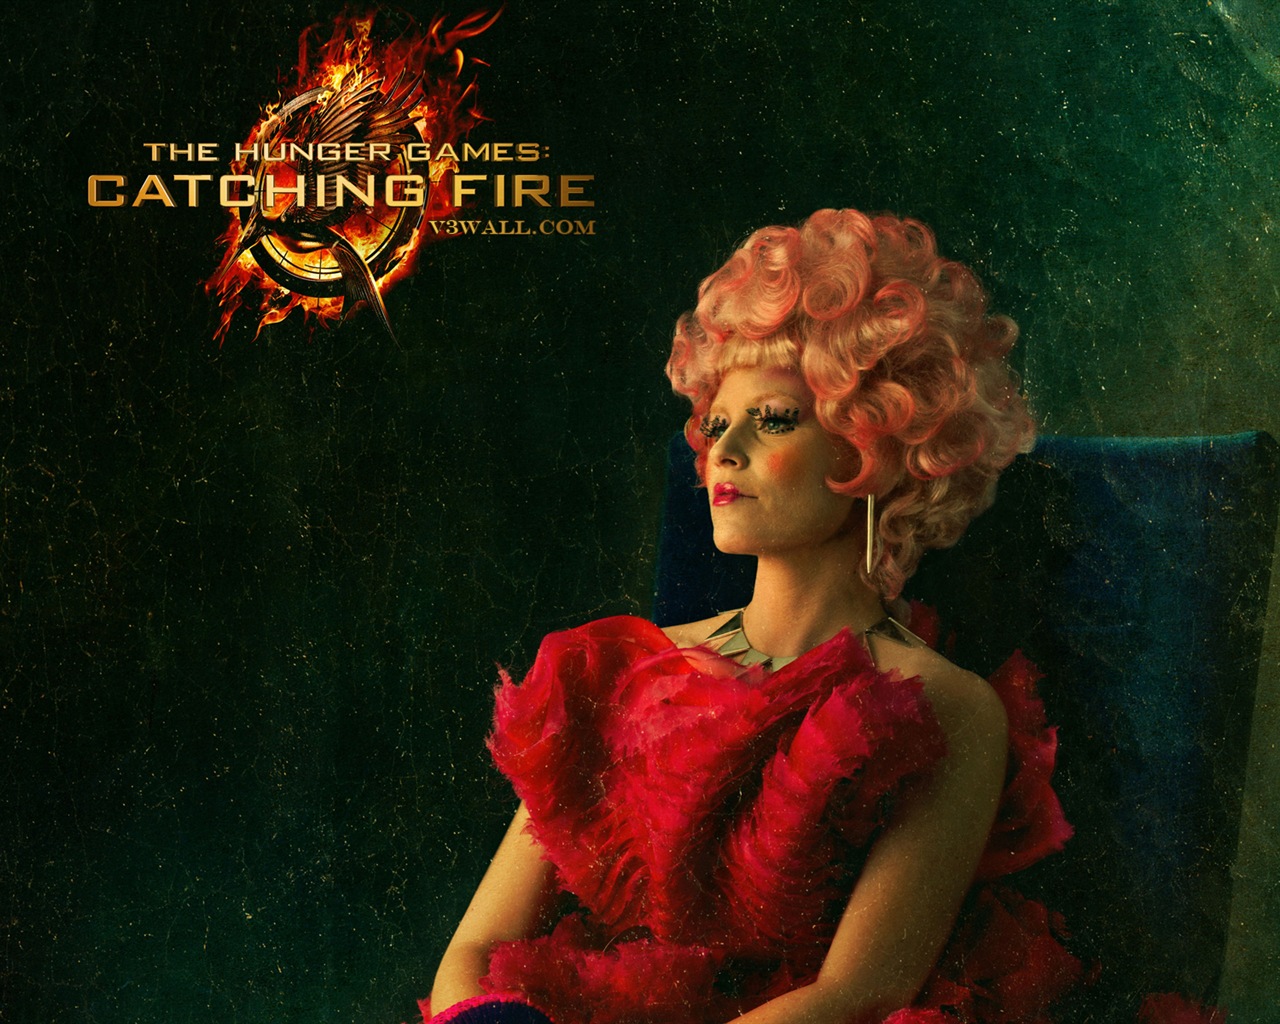 The Hunger Games: Catching Fire wallpapers HD #19 - 1280x1024